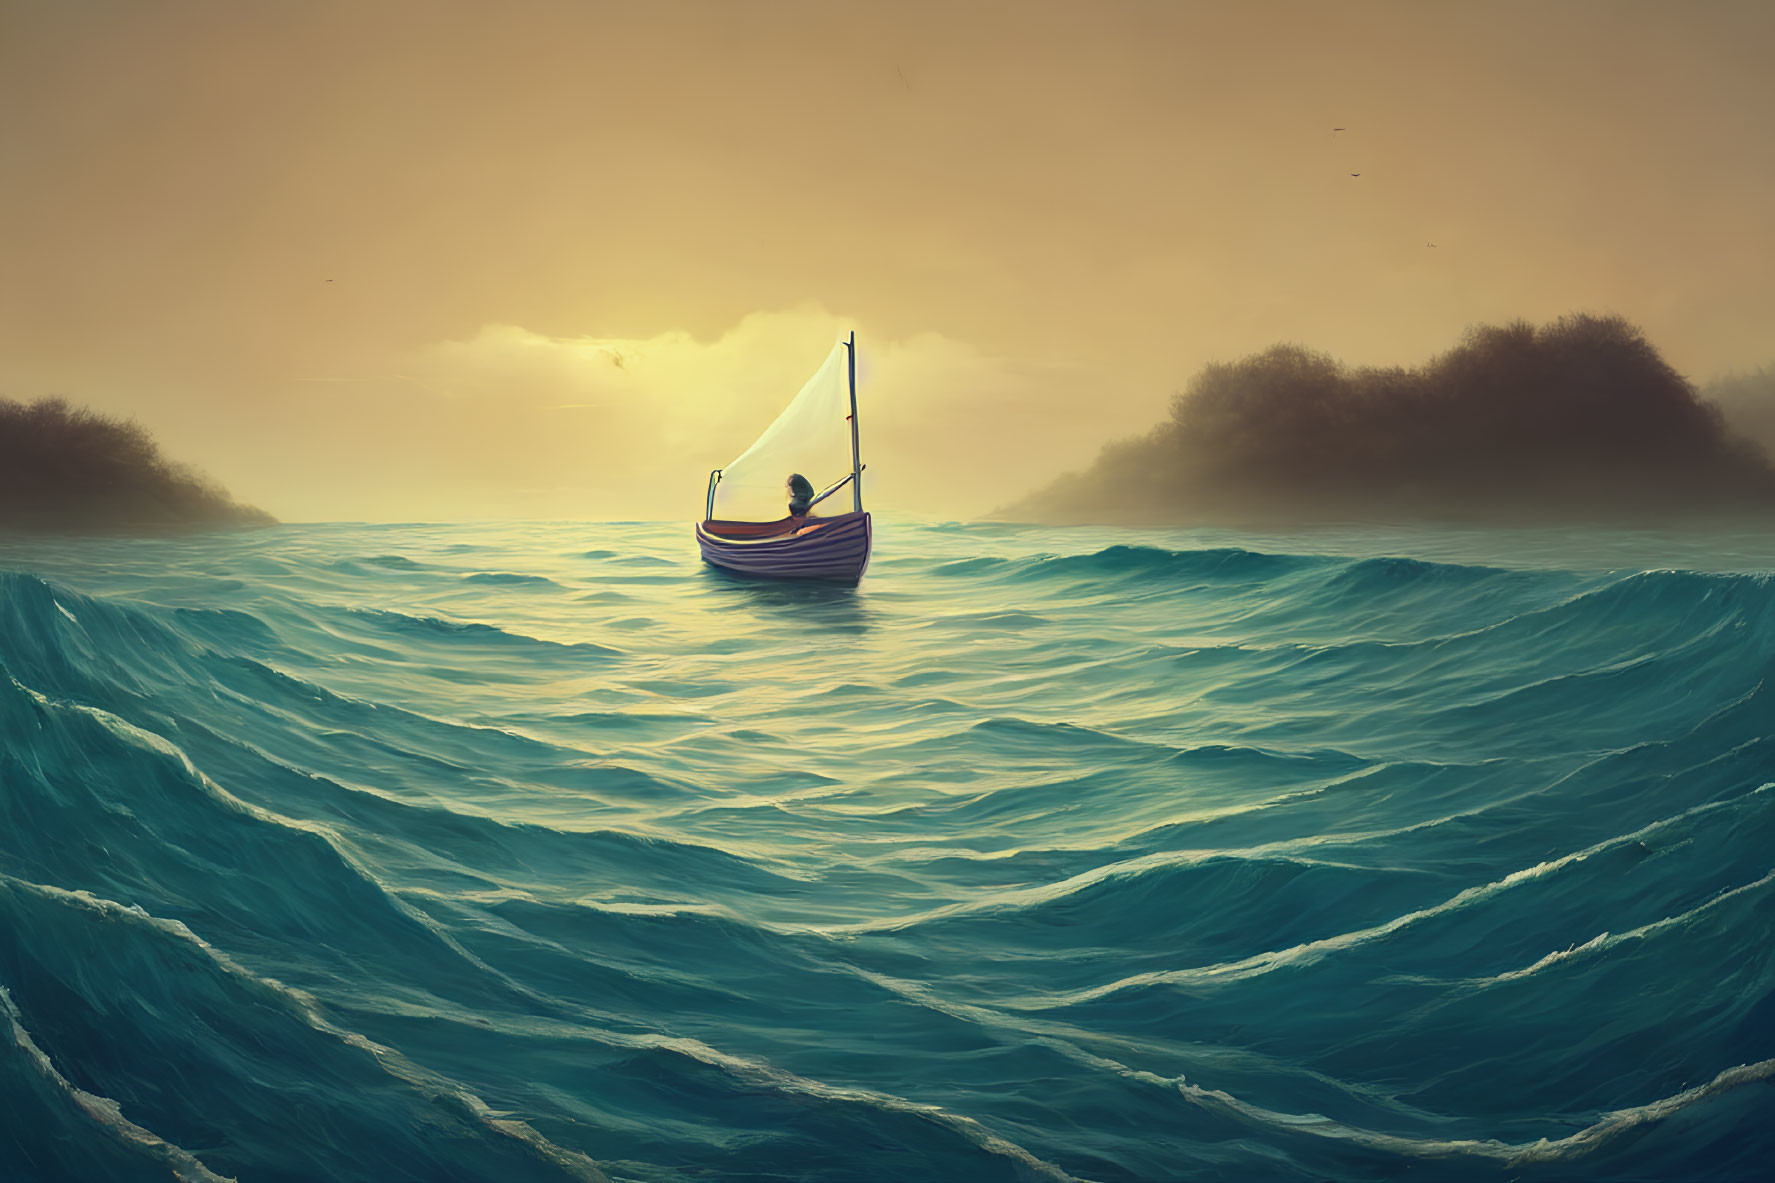 Solitary individual rowing boat on turbulent sea under amber sky